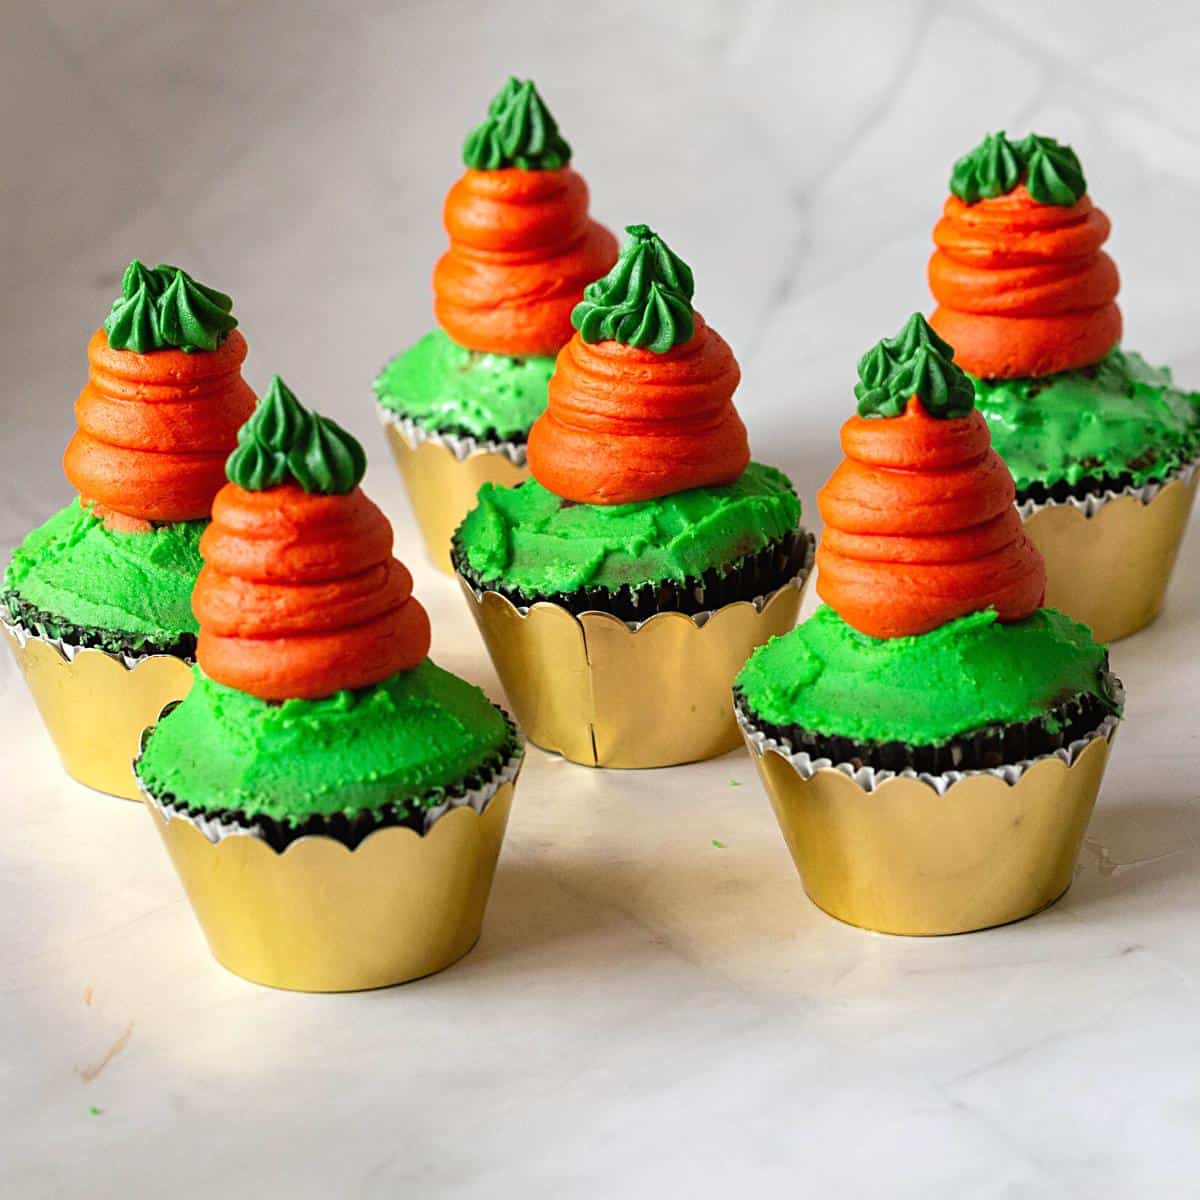 Cupcakes for Easter frosted with orange carrots.